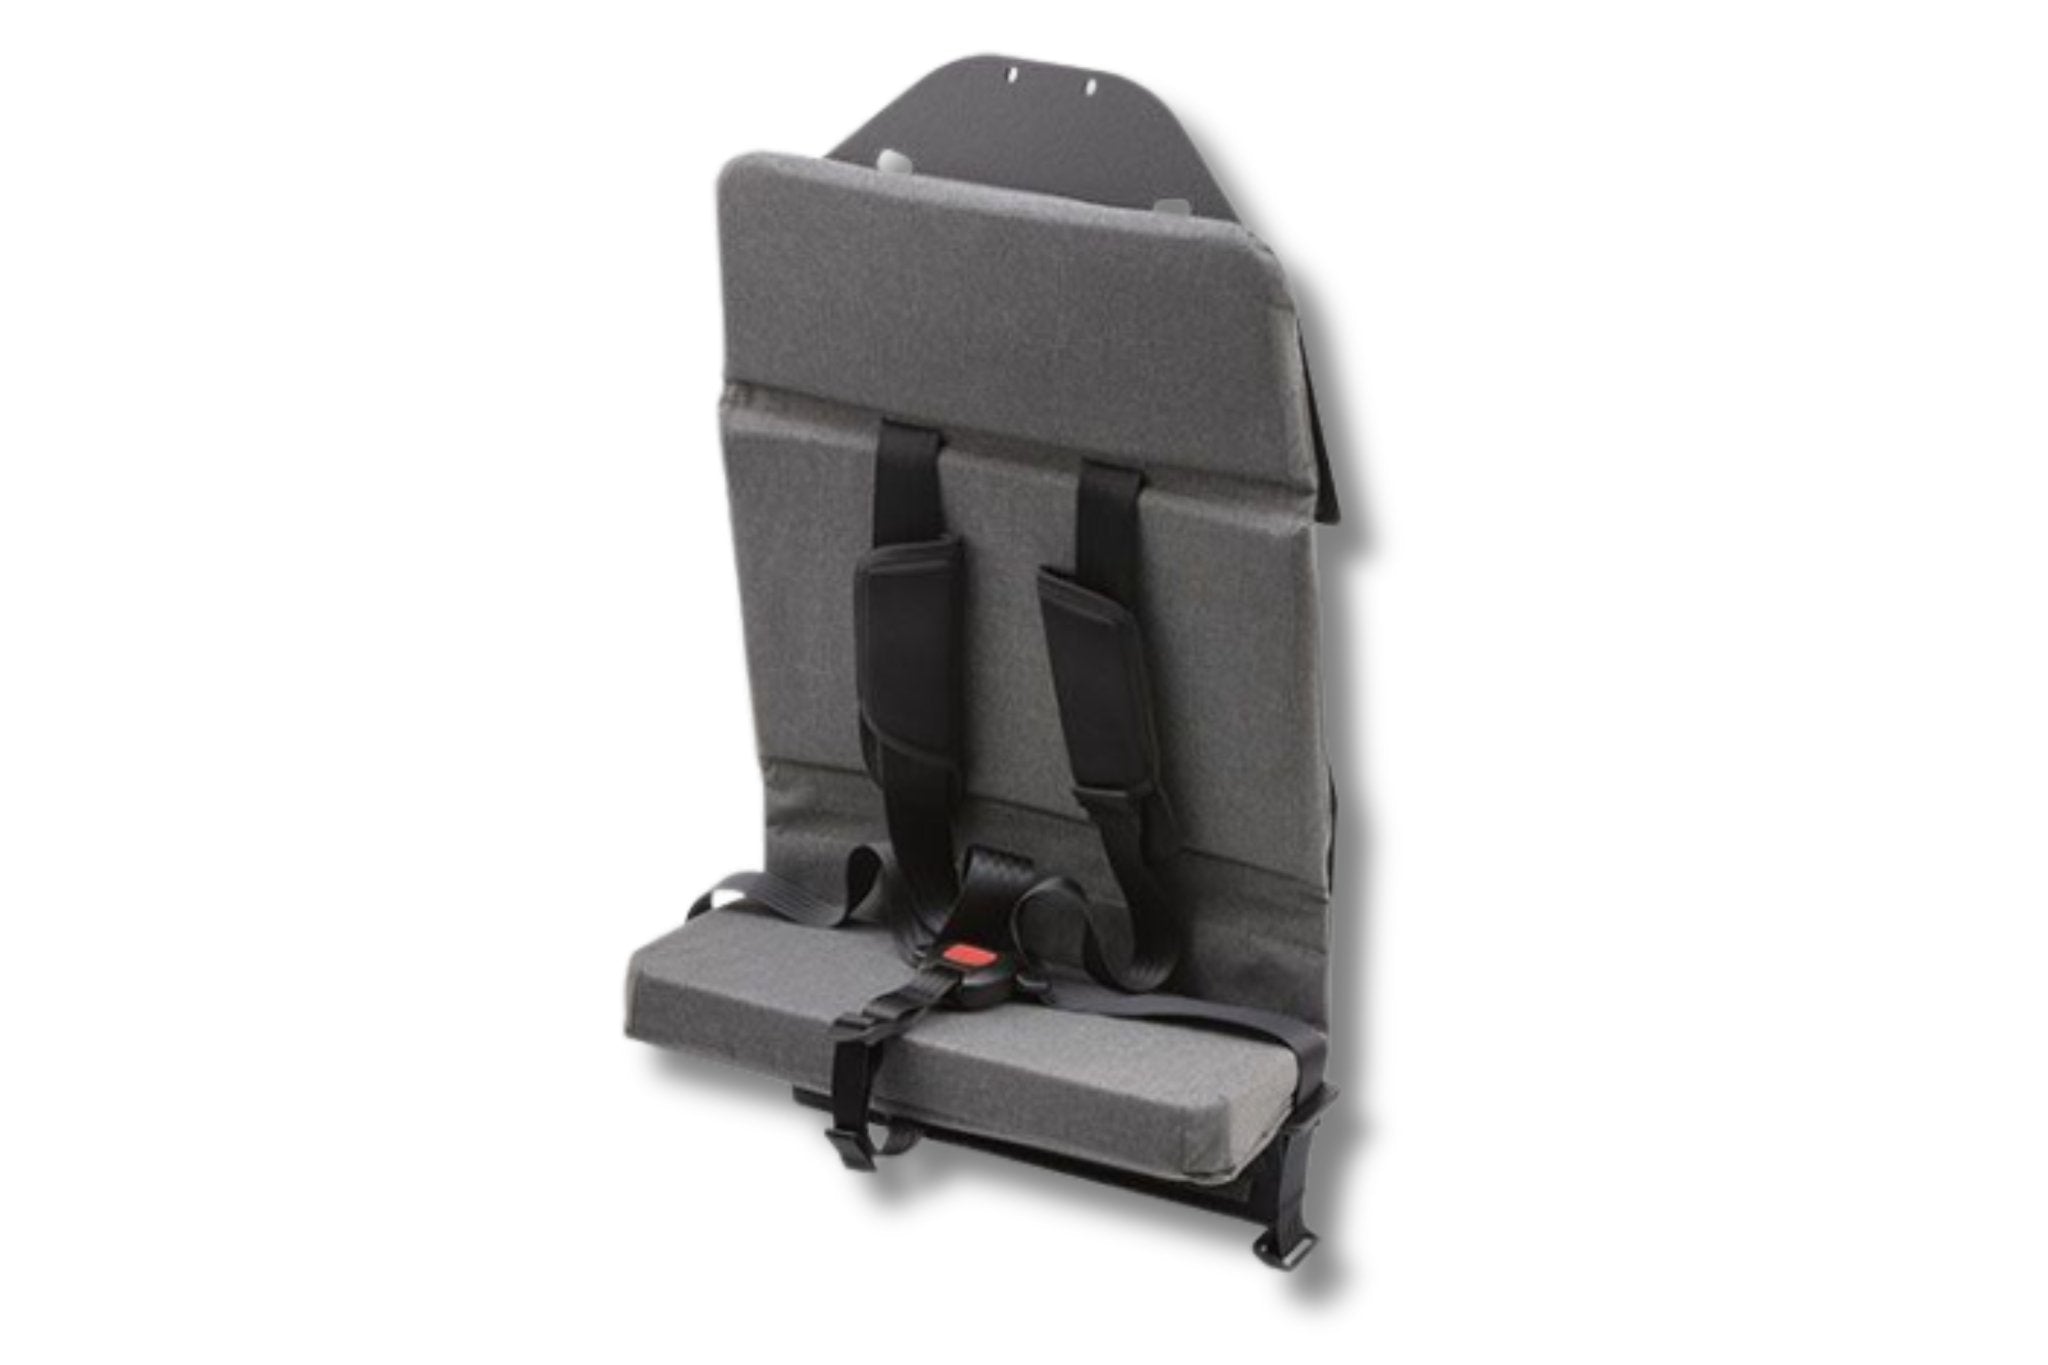 Riese and Muller Packster Front Seat - Dutch Cargo (AU) - Riese and Muller Accessories - Accessories - Riese and Muller Packster Front Seat